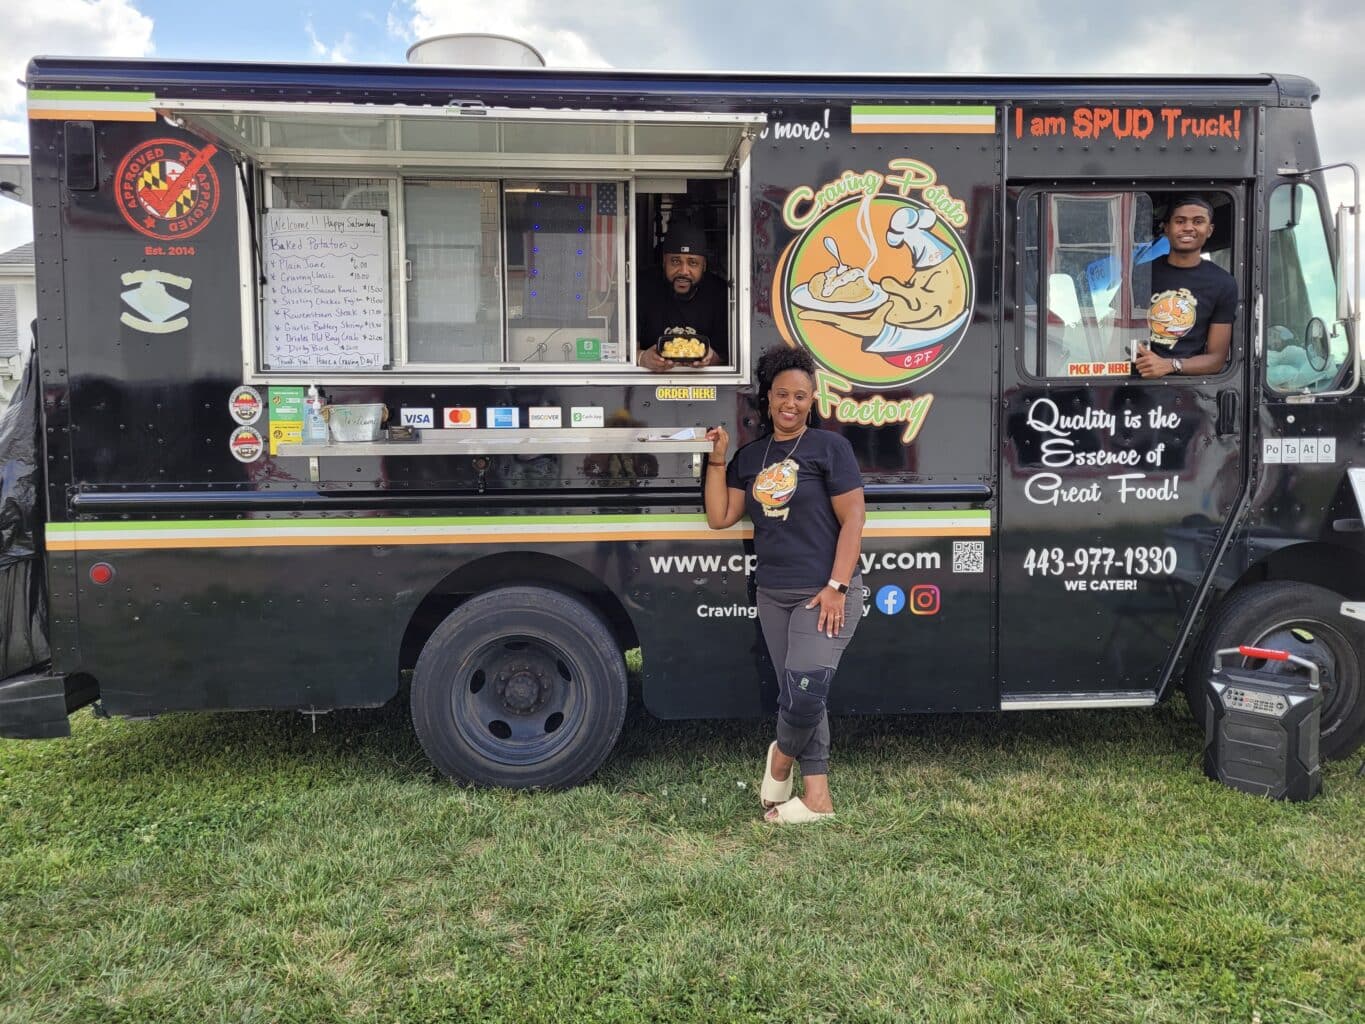 Craving Potato Factory -- CJ and Monique Jacobs & their Spud Truck